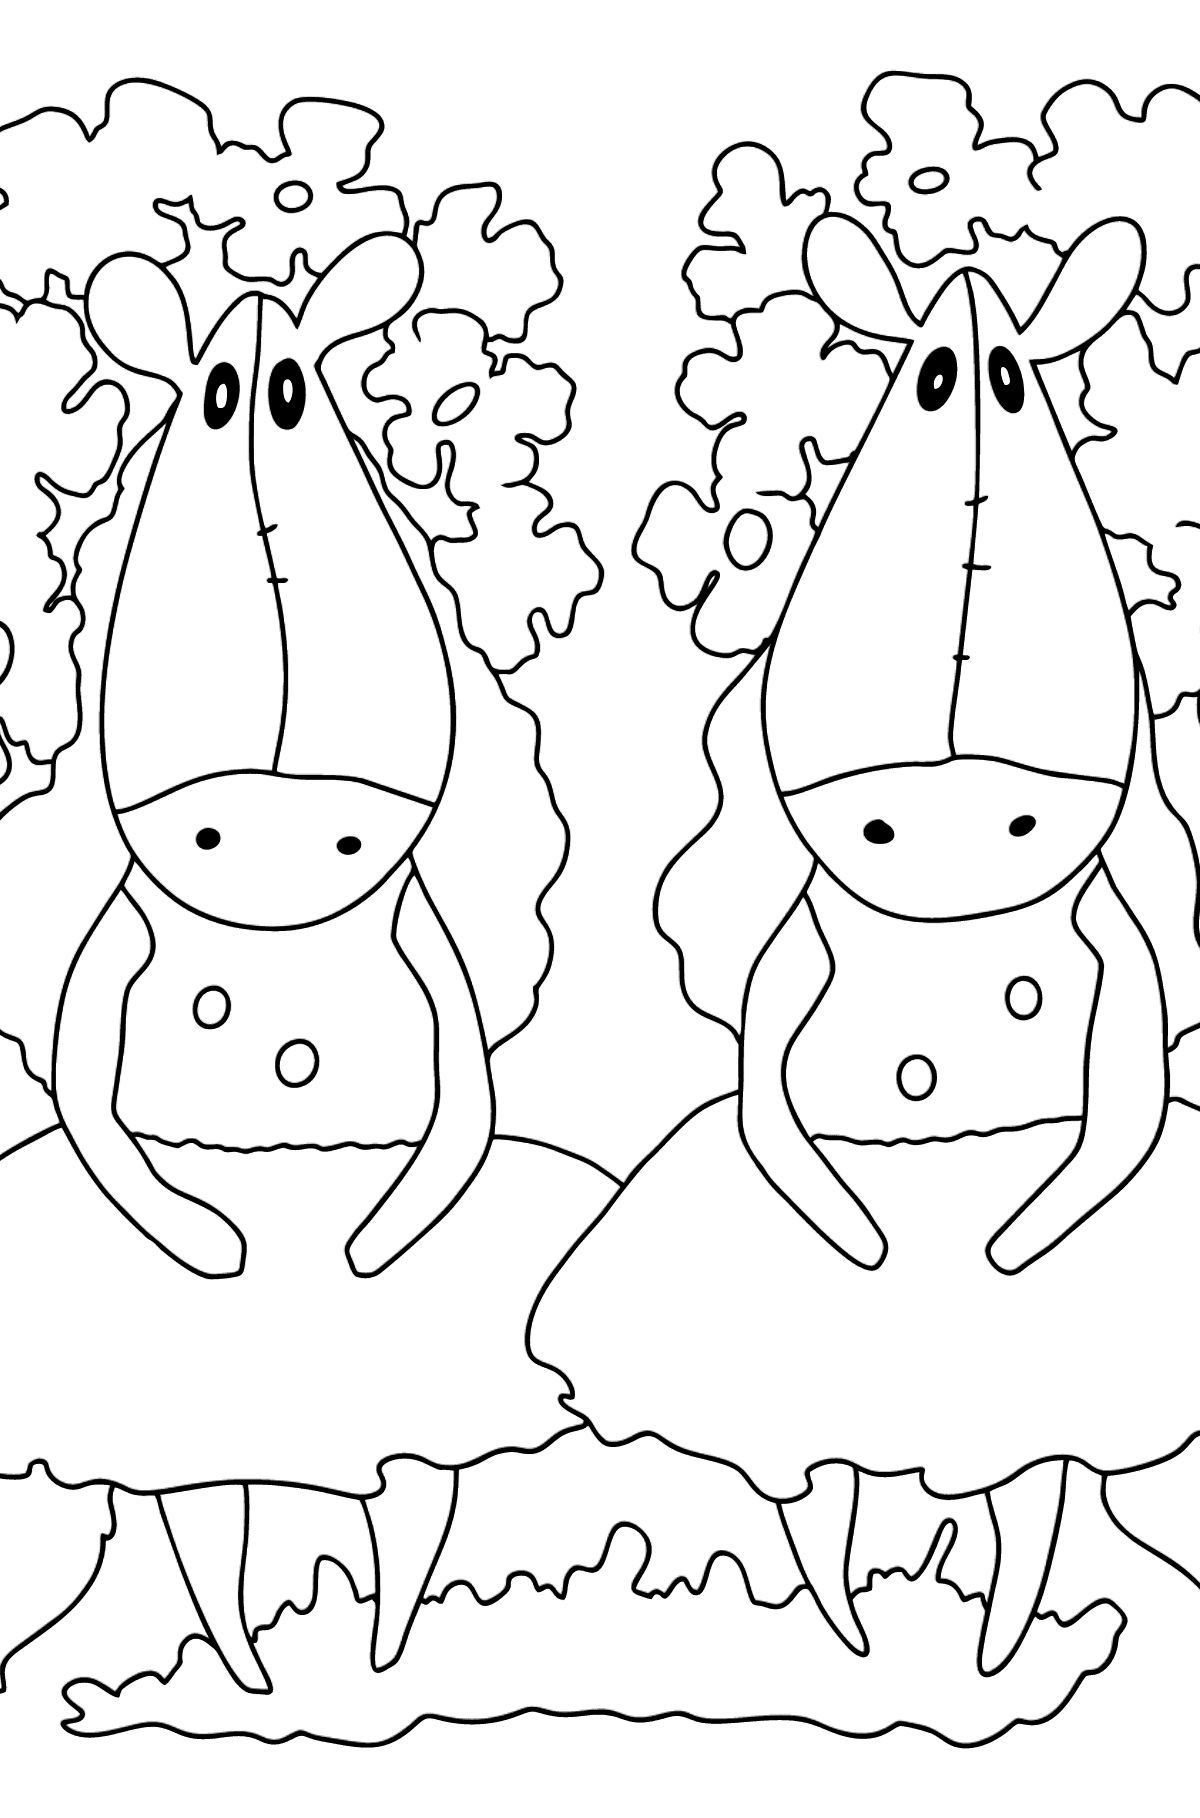 Coloring page a couple of horses - Coloring Pages for Kids